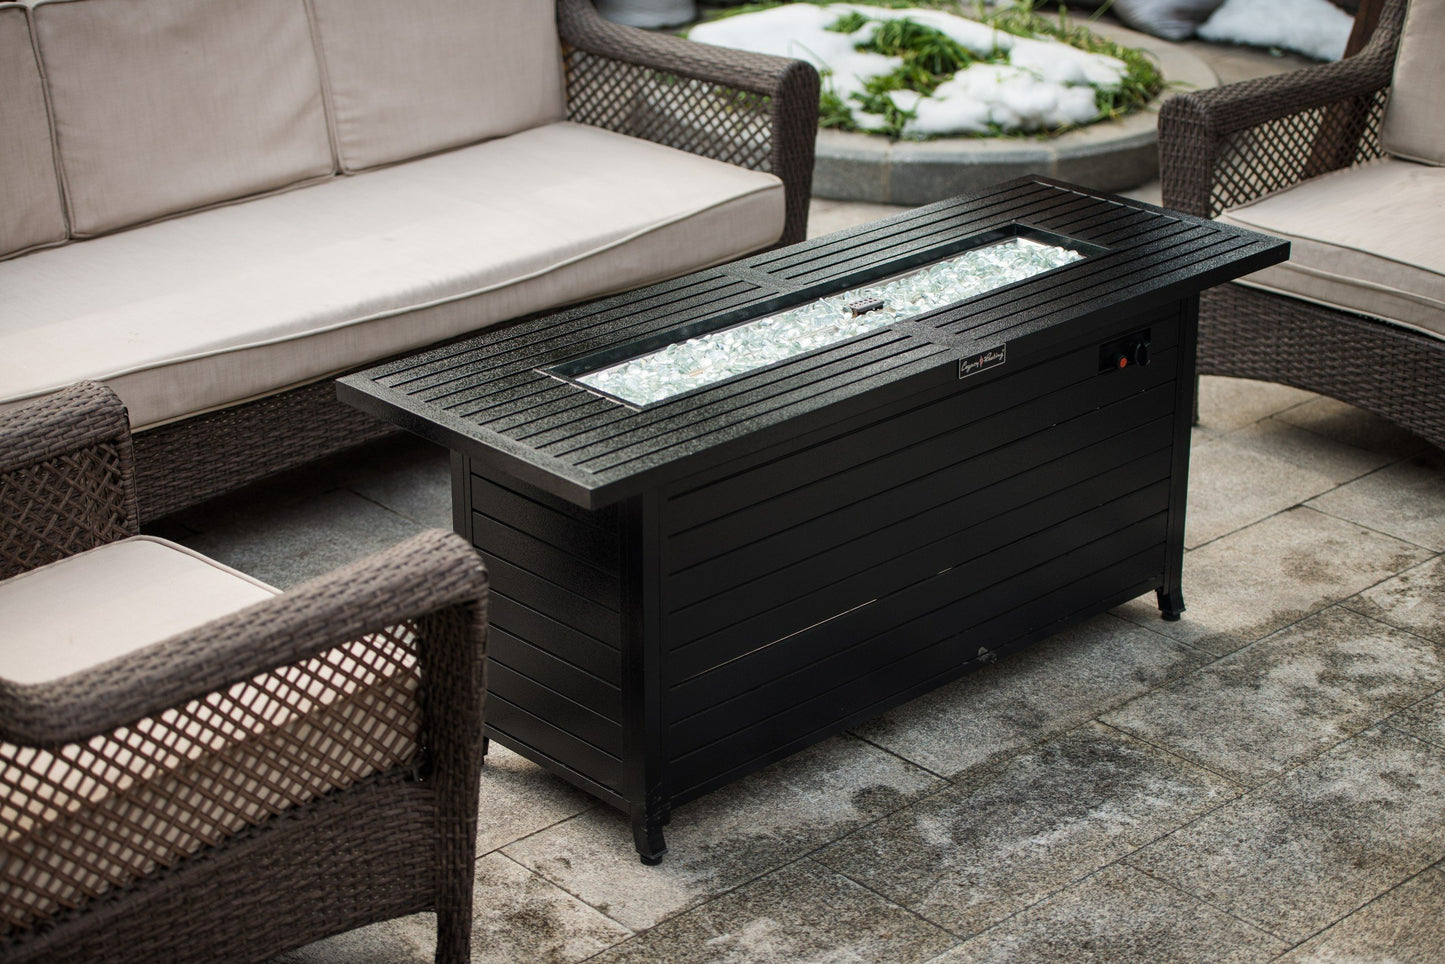 57-inch Propane Fire Pit Table with Lid and Fire Glass - Hammered Black Aluminum Outdoor Fireplace Dining Table